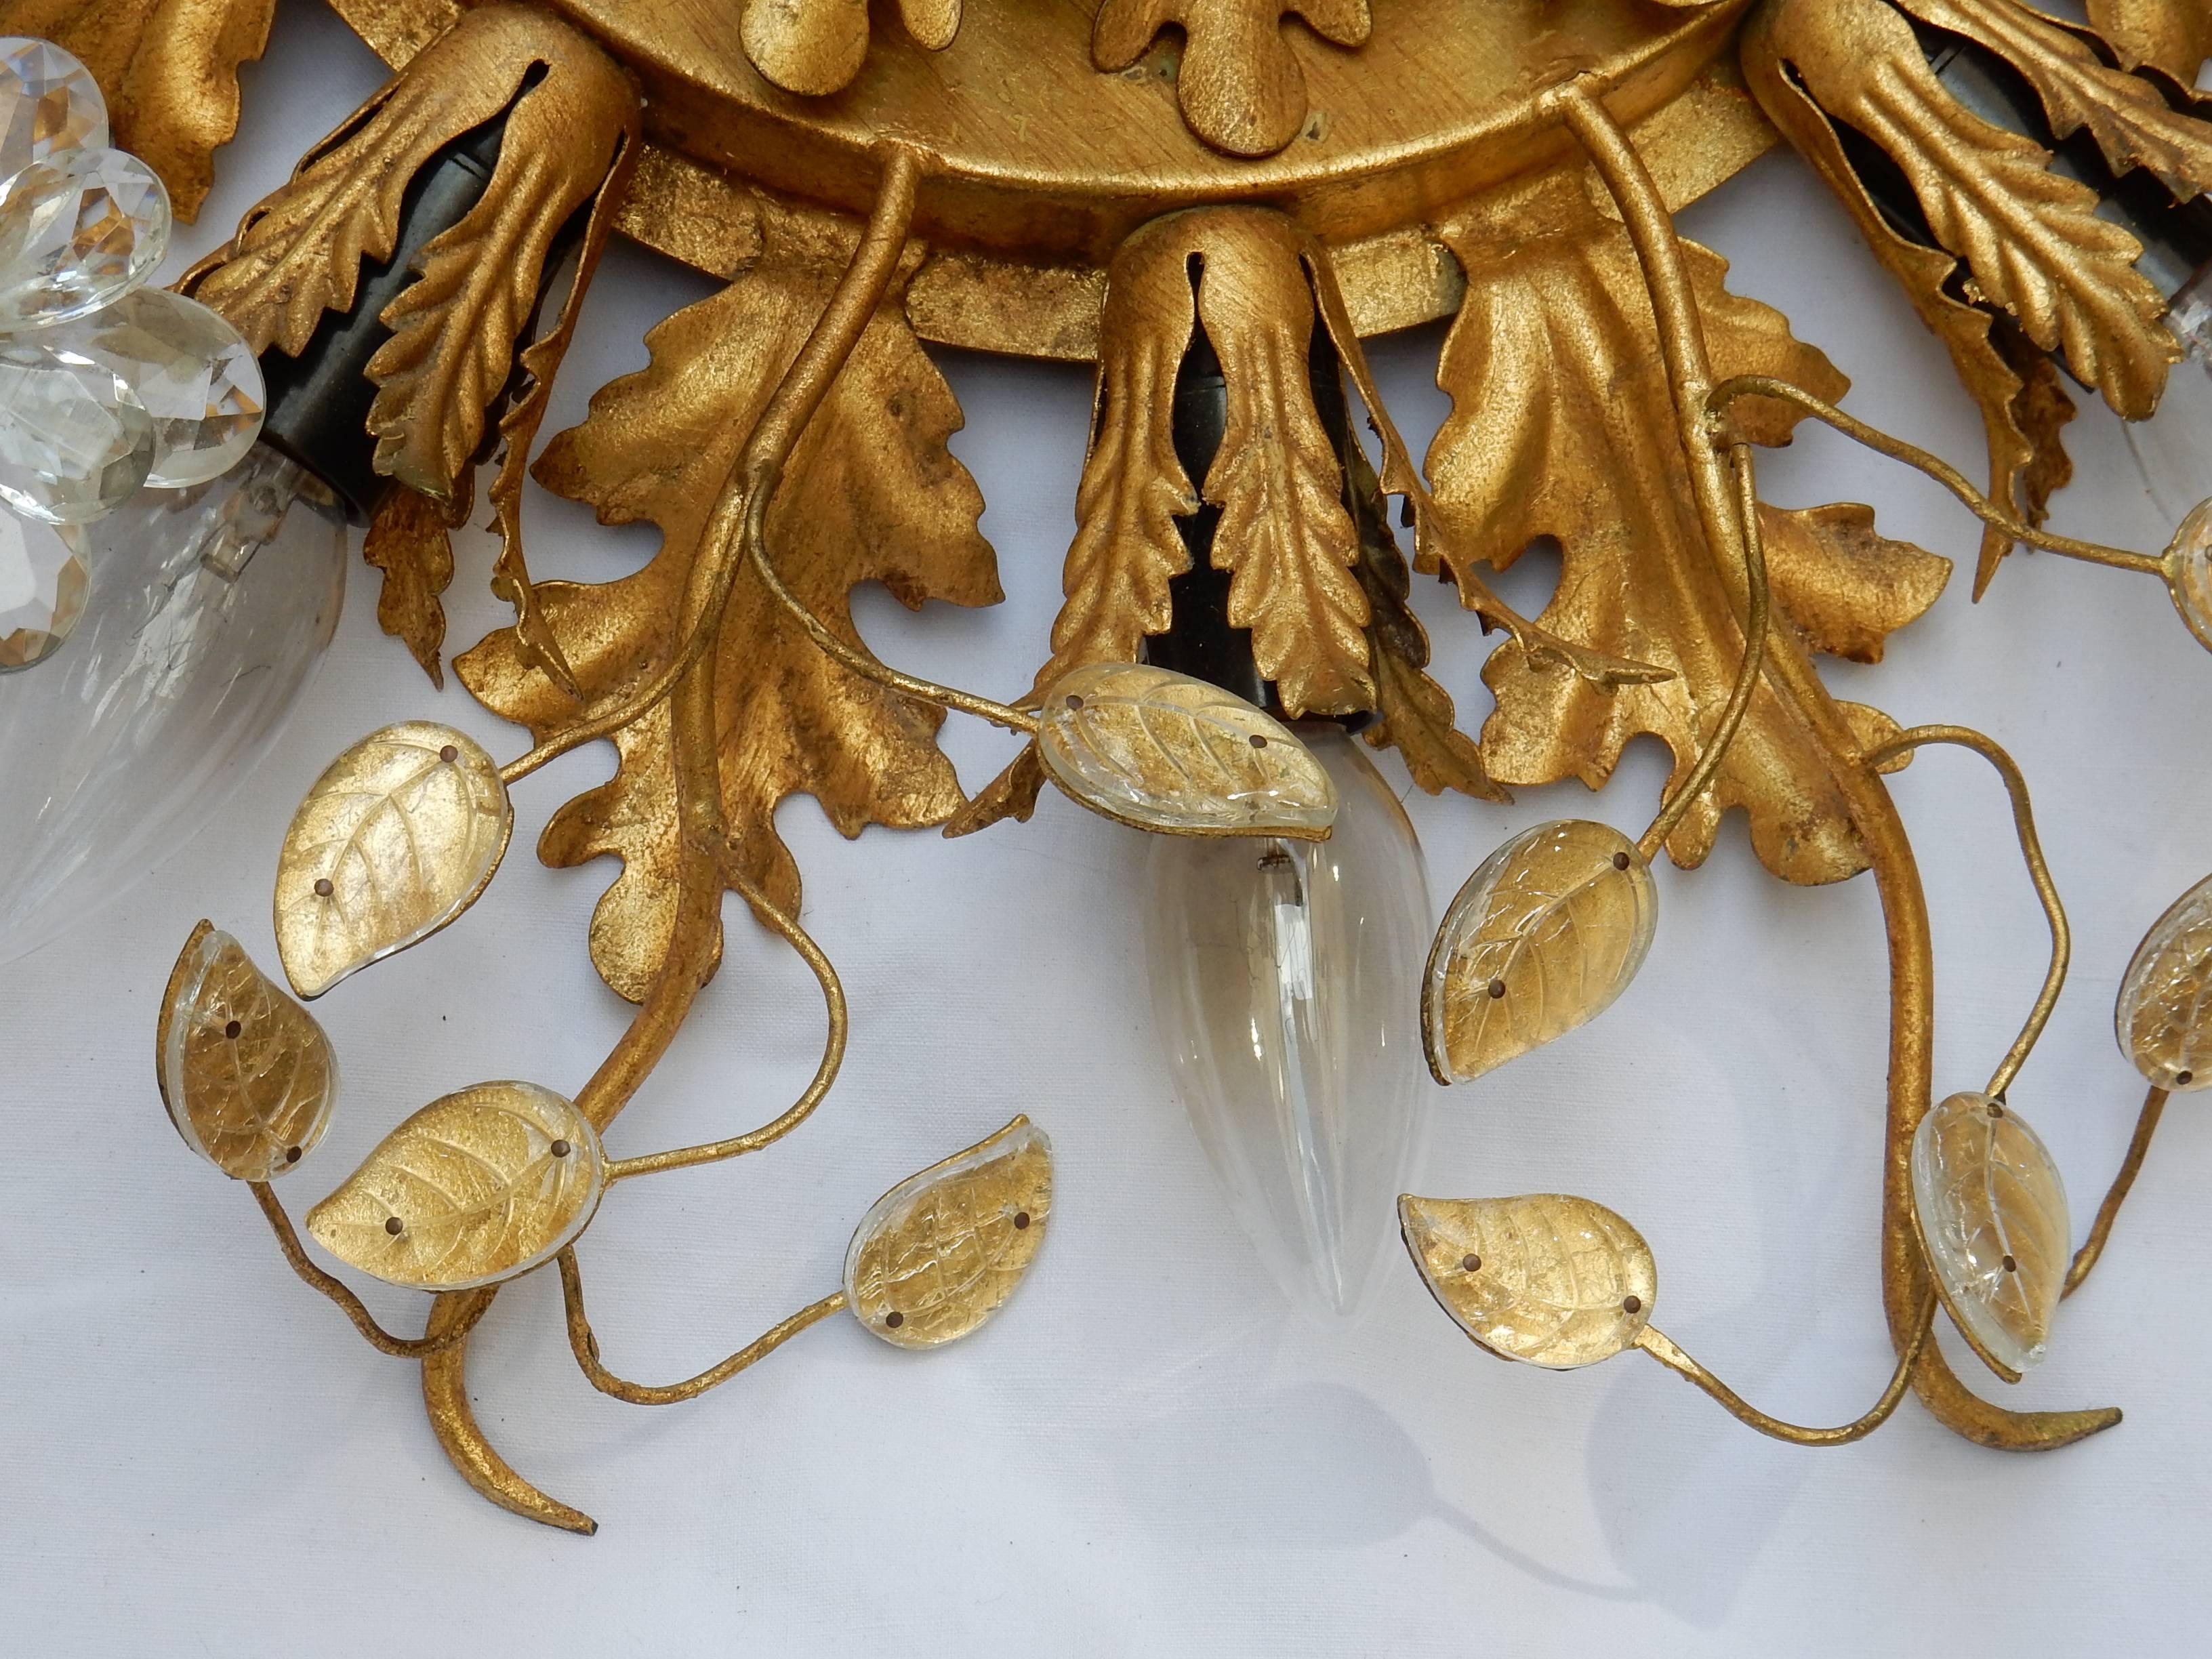 Iron 1950-1970 Ceiling Light Has Floral Decoration in the Style of Maison Baguès